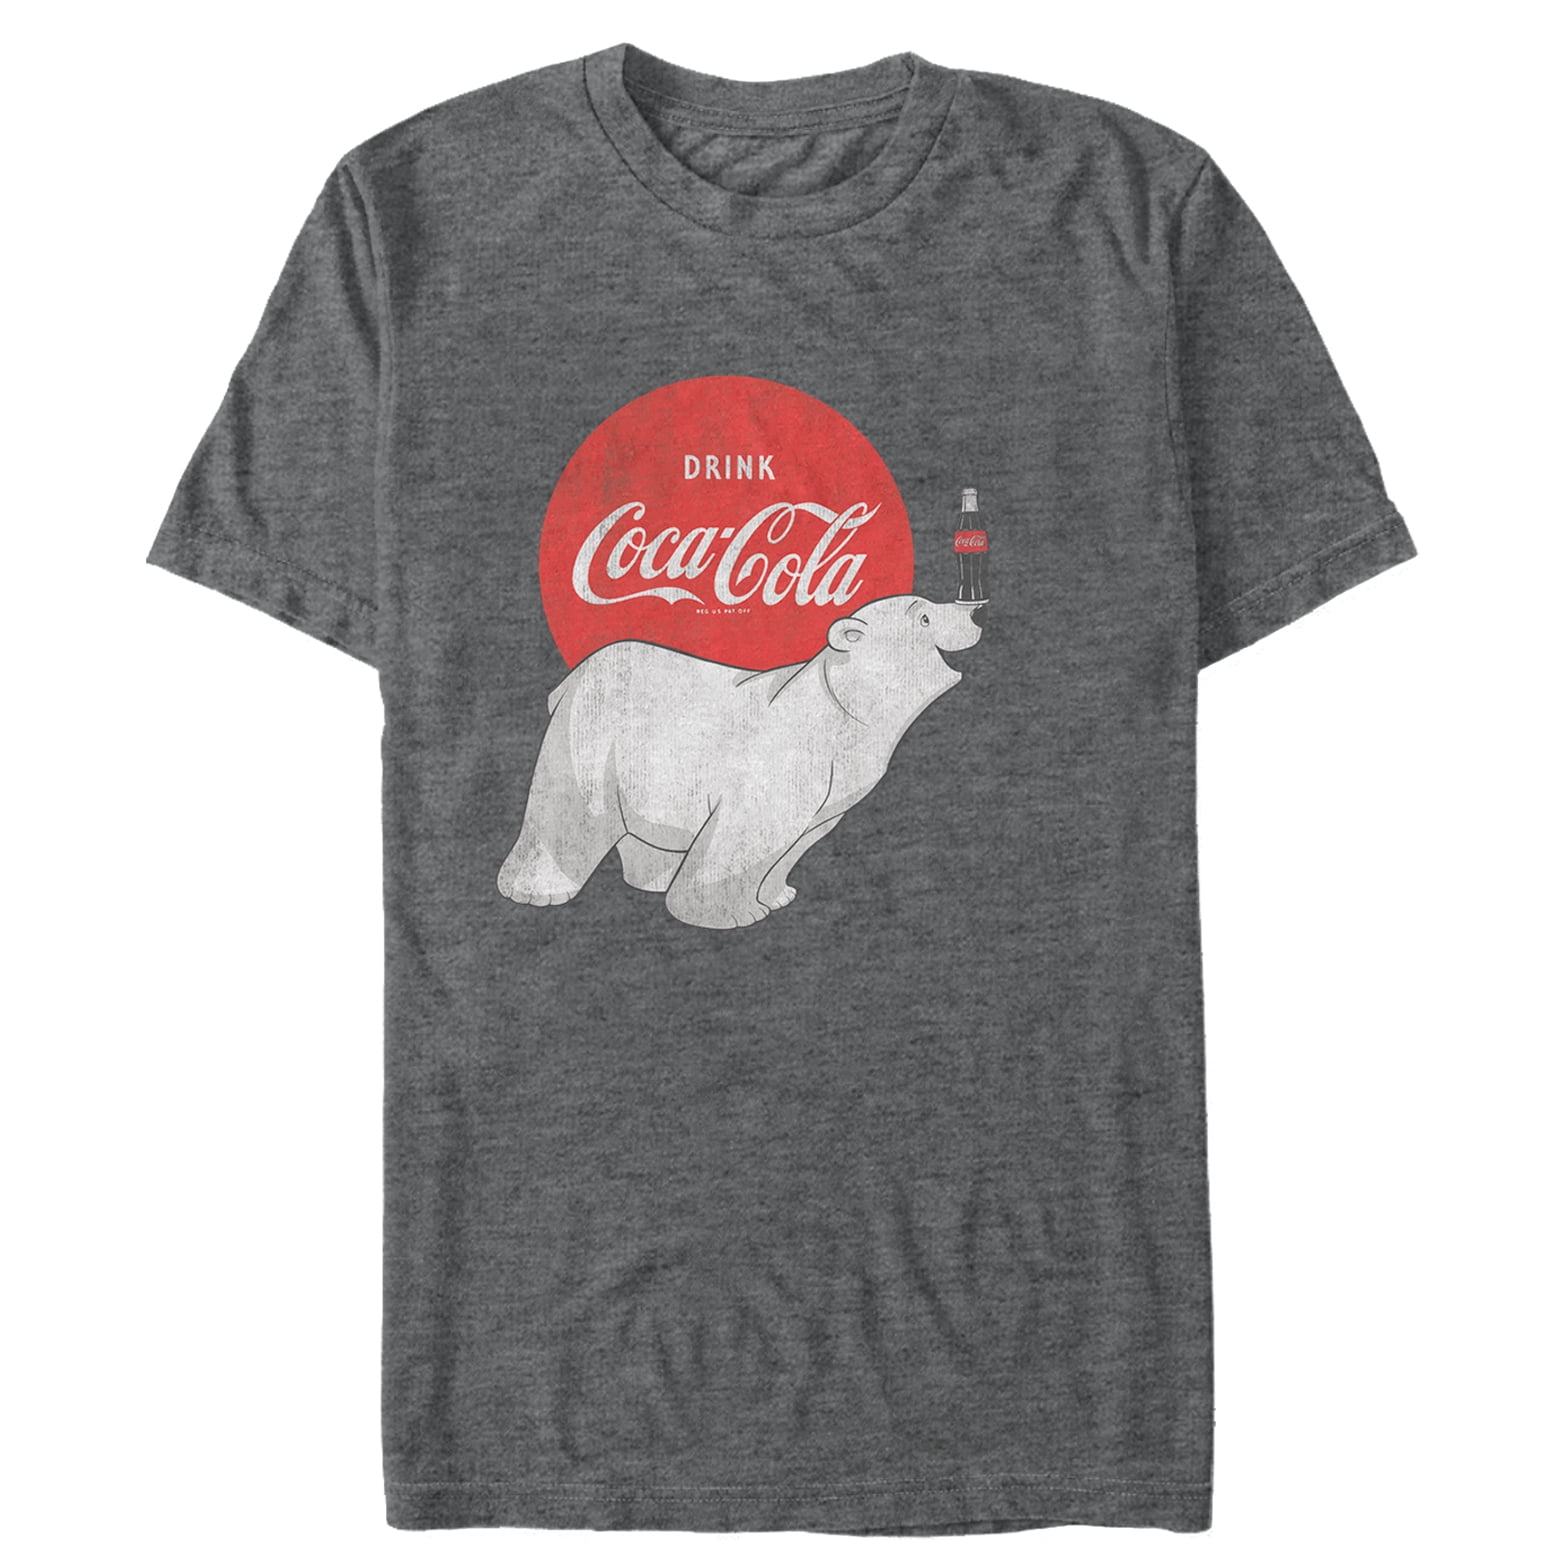 BRAND NEW Coca-Cola Heather Gray and Red Sport Fabric Tee T-shirt 2X-Large 2XL 